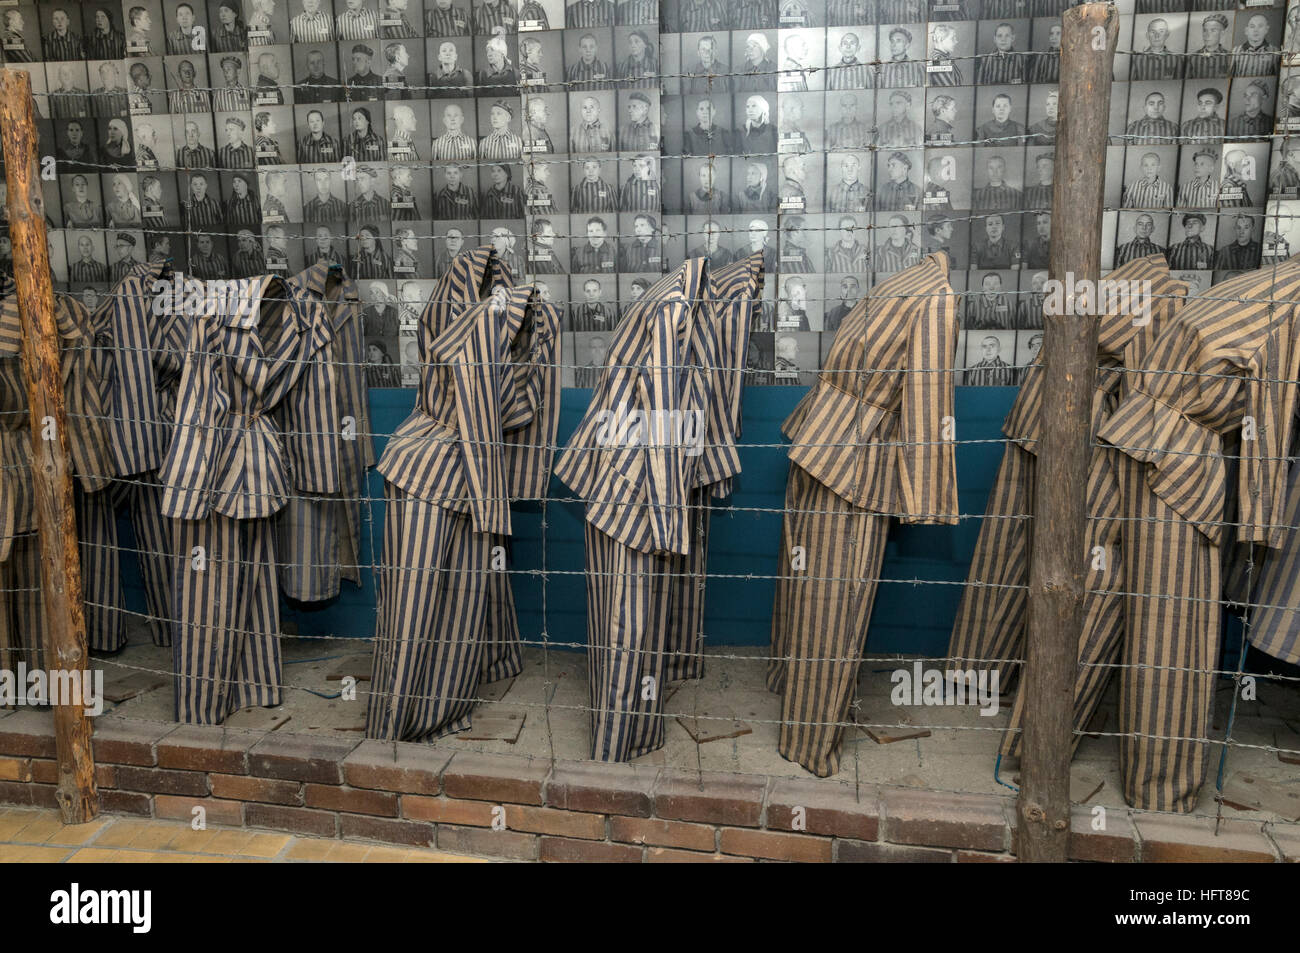 Many of the existing ex-prisoner accommodation blocks are now small museums at Auschwitz Birkenau Nazi concentration camp in Oswiecim, Poland.  The di Stock Photo